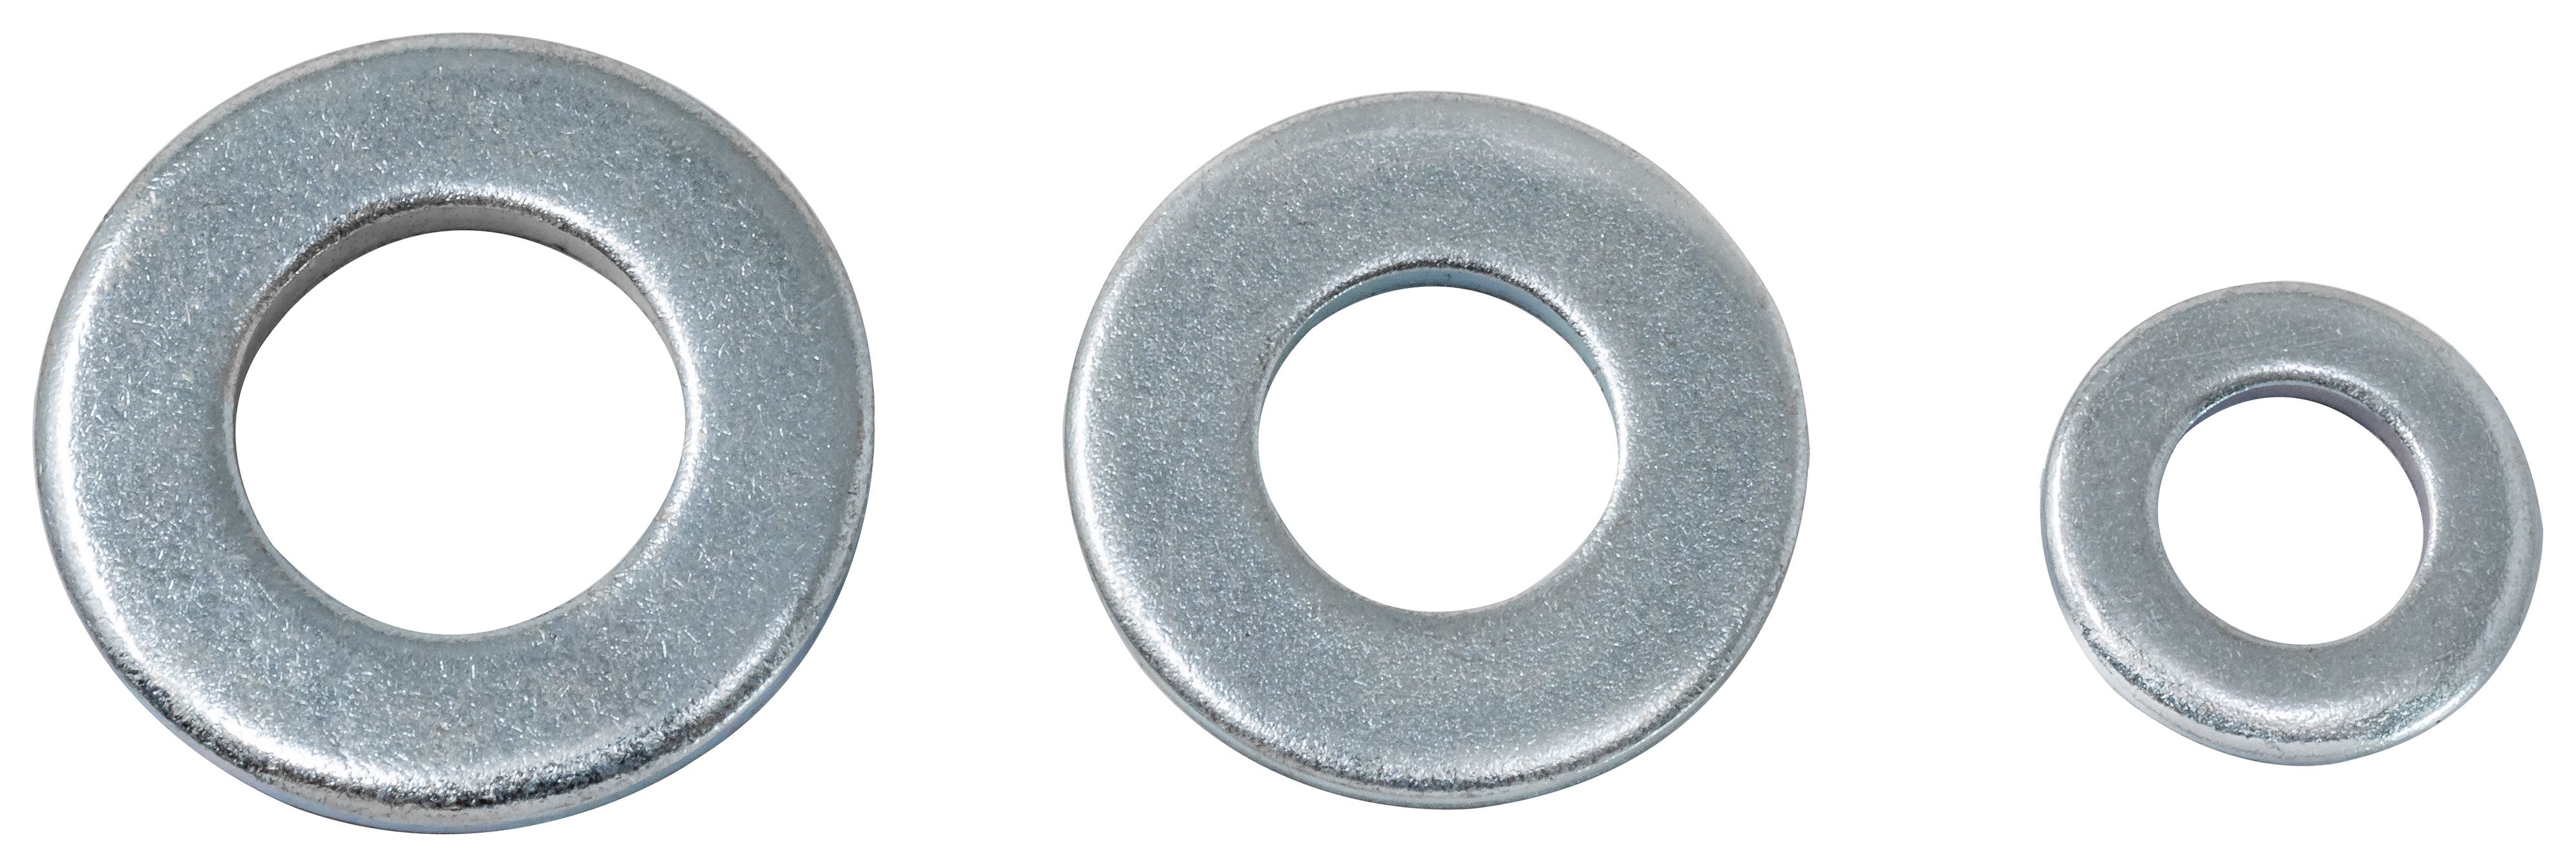 Wickes Assorted Washers Pack Of 100